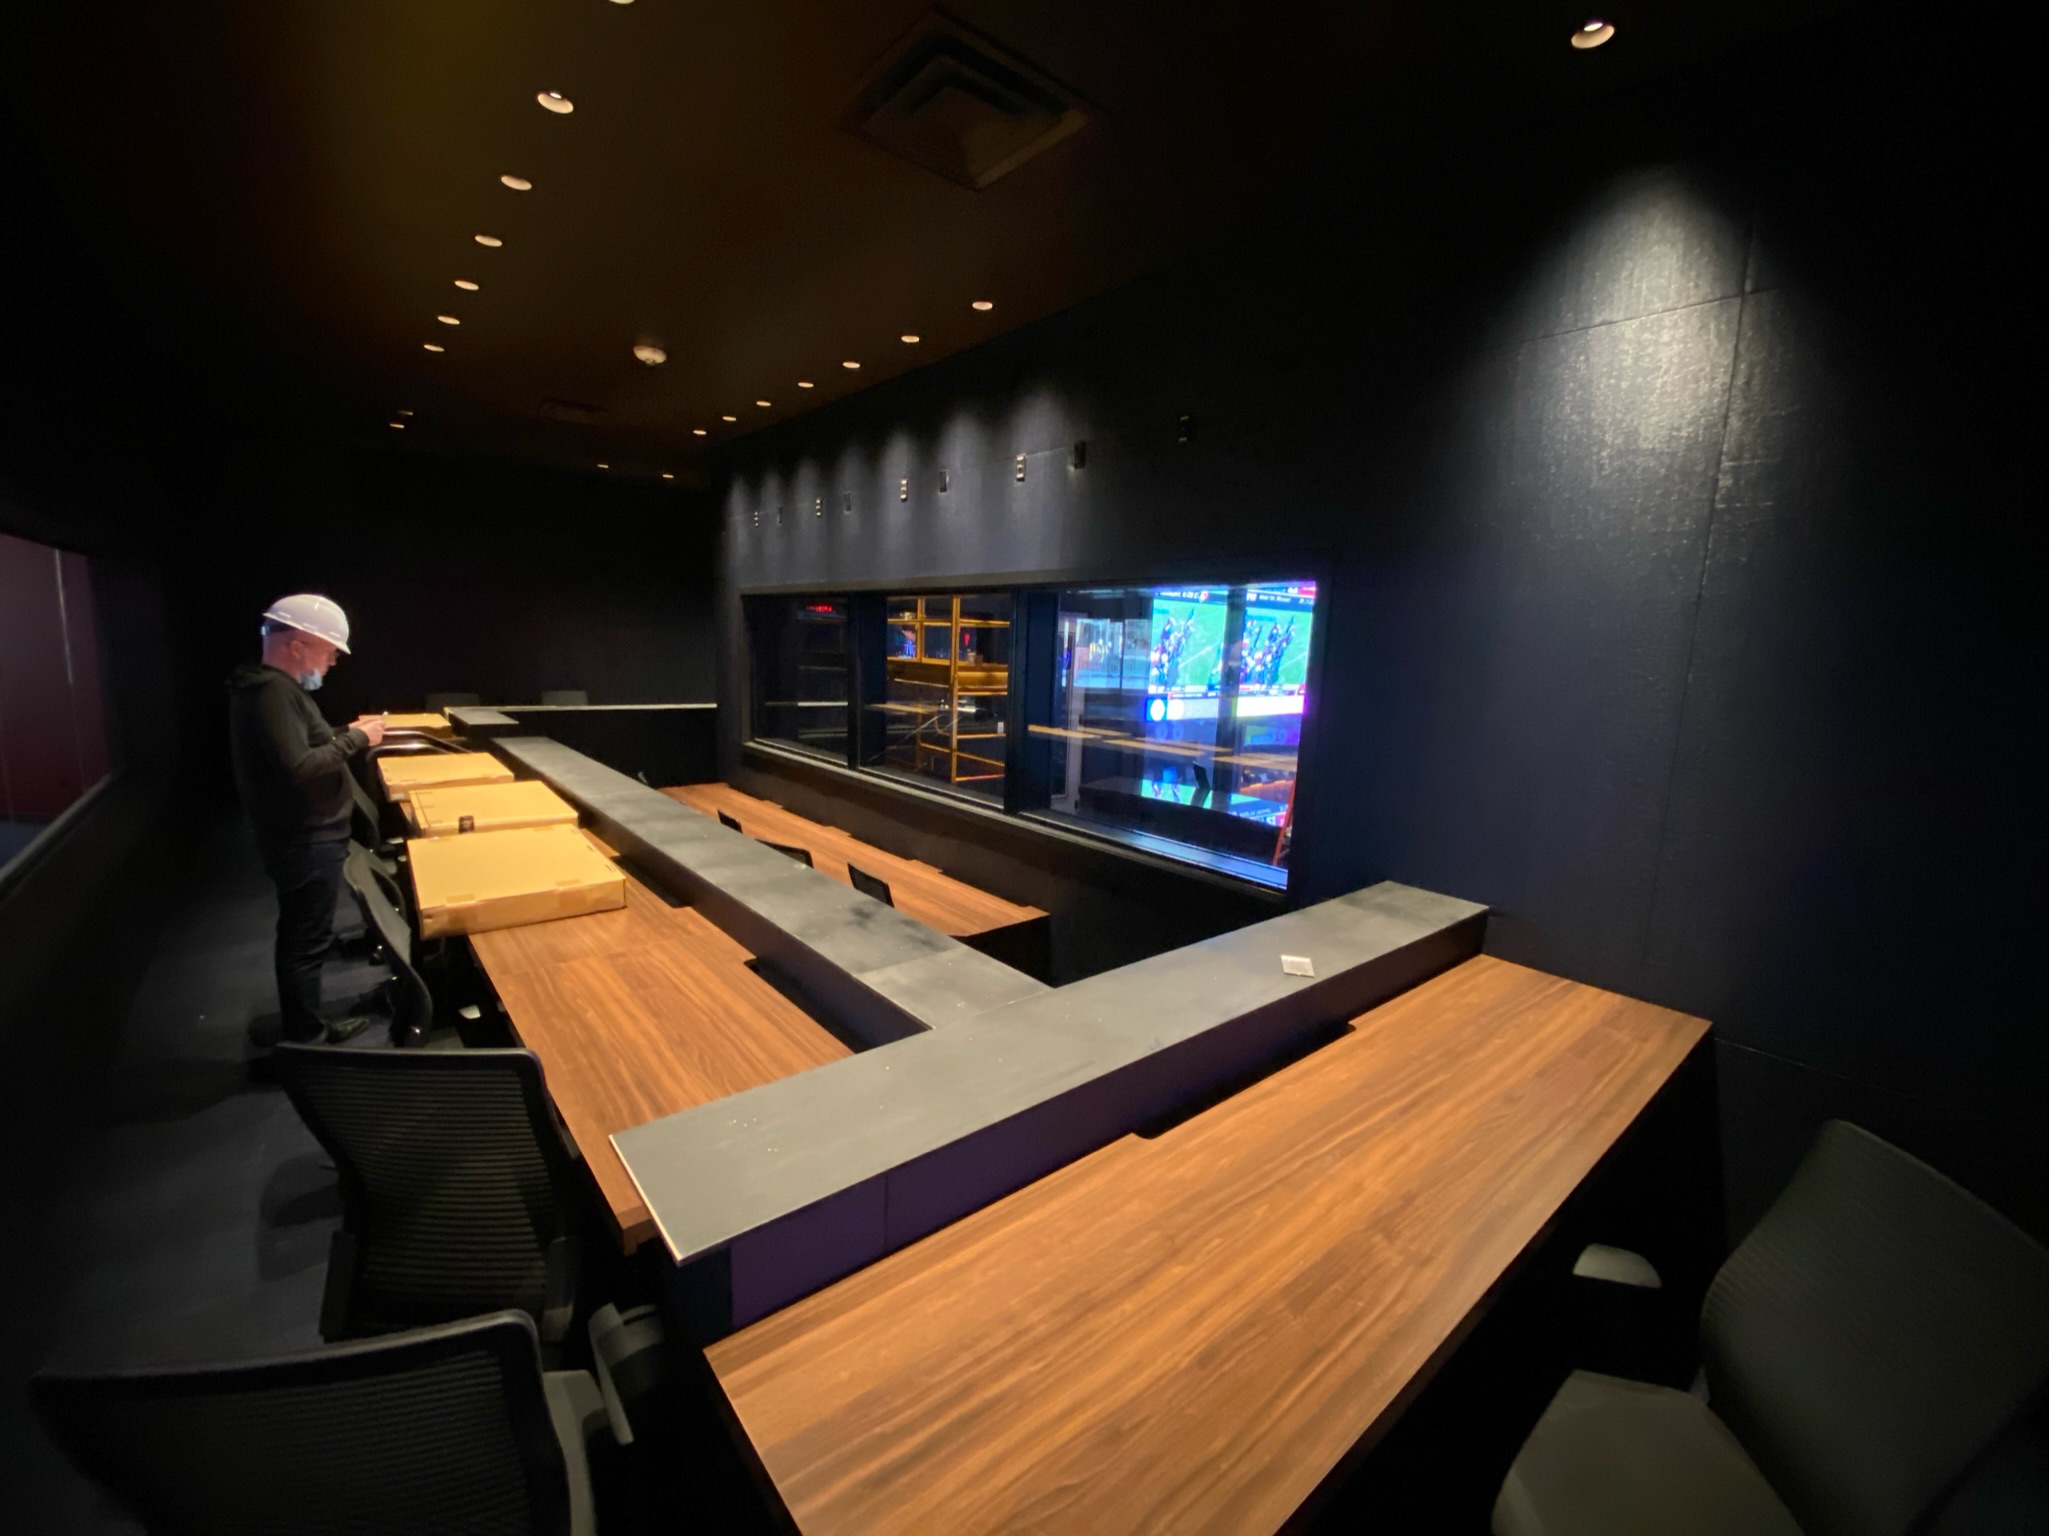 Why Circa Sportsbook In Vegas Makes For An Immersive Day of NFL Betting